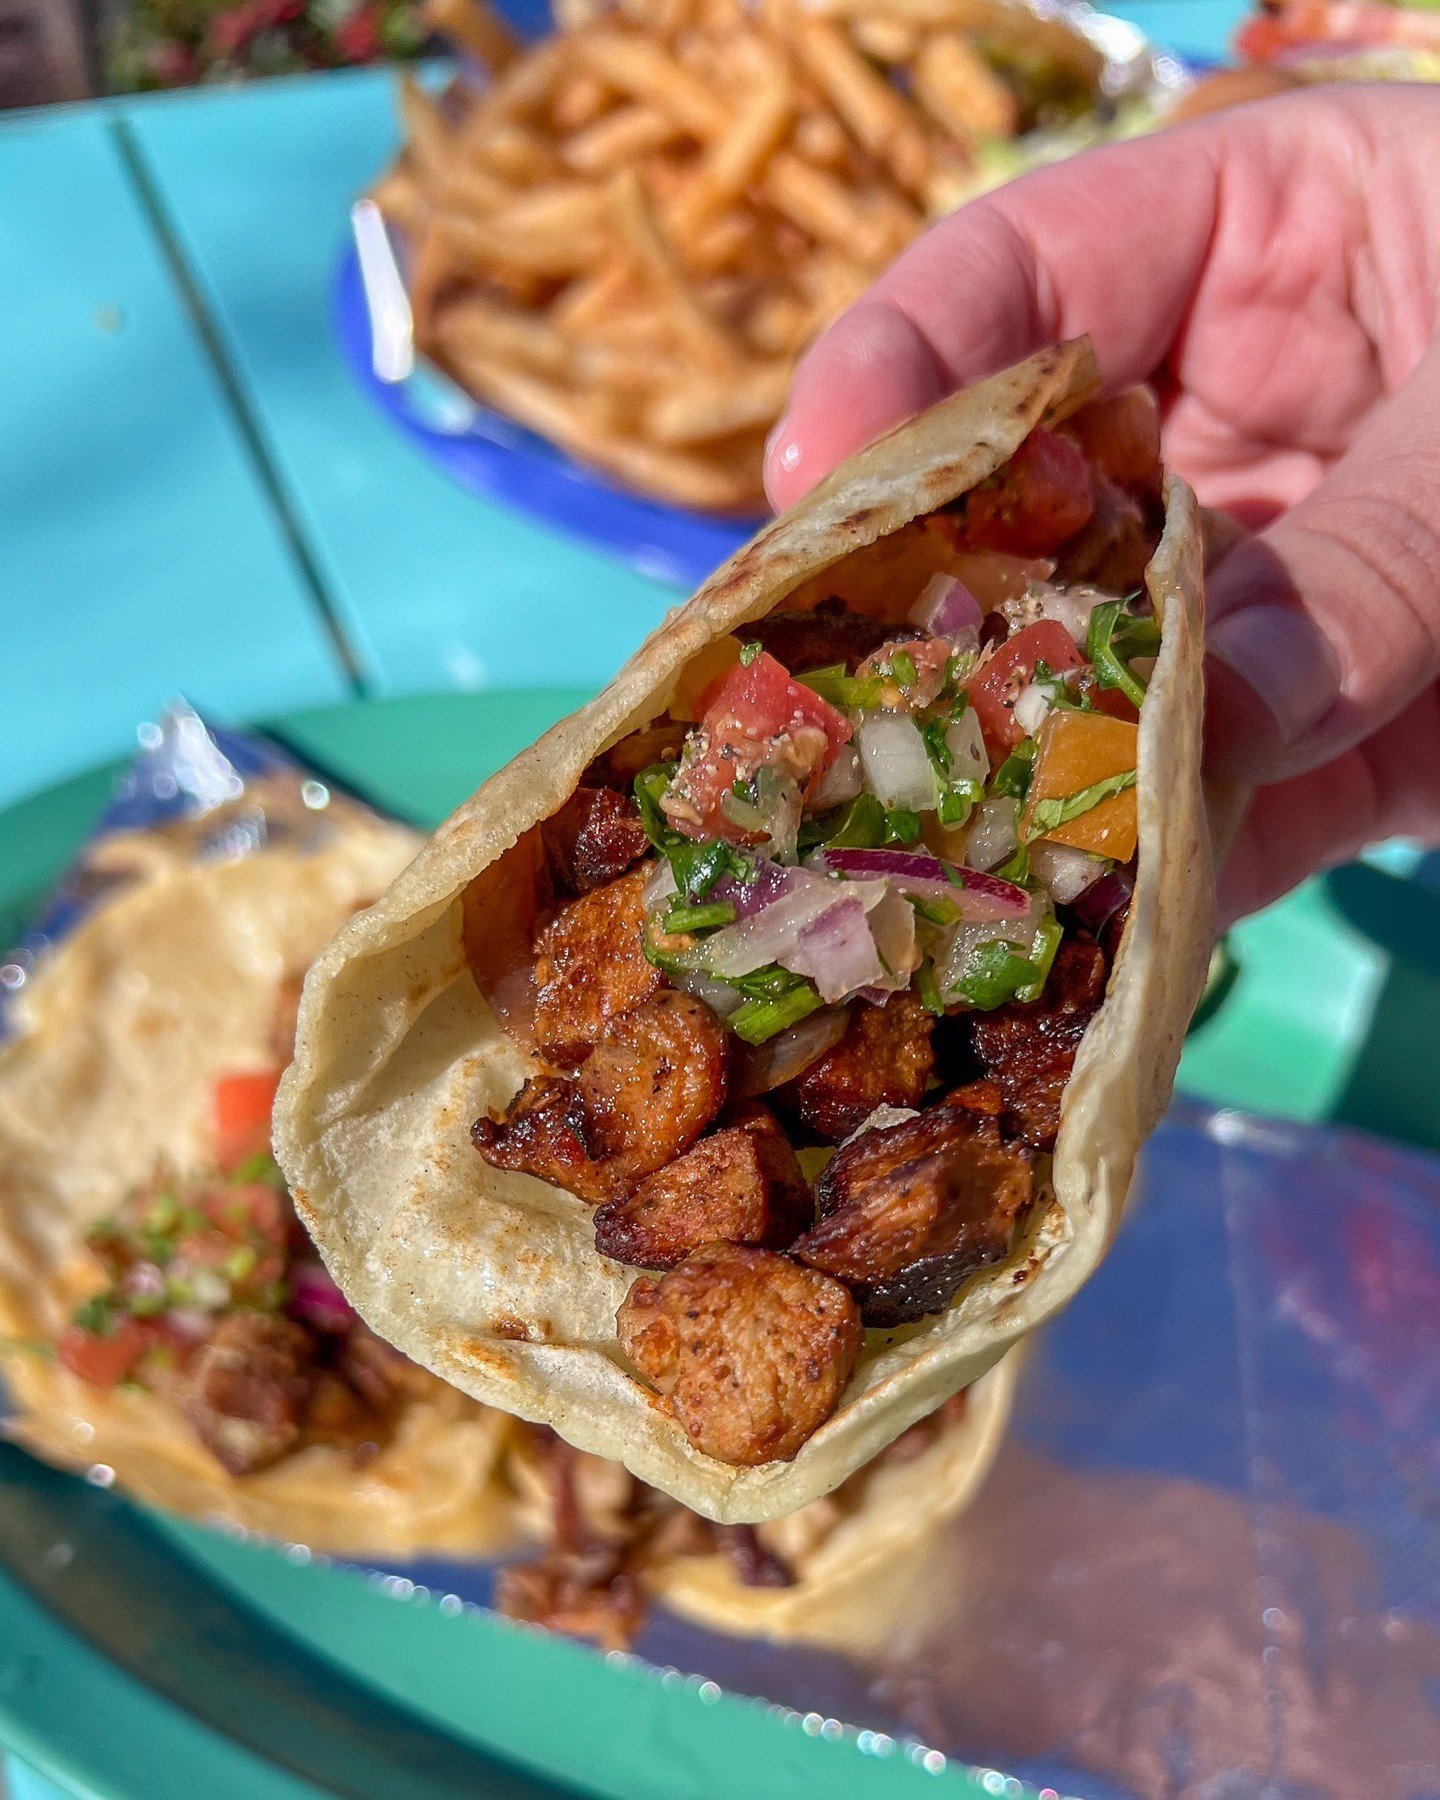 All you need is one bite to be in love with our tacos 🌮

#oraletacobar #taqueria #southernpines #mexicanfood #comidamexicana #southernpinesfood #southernpinesnc